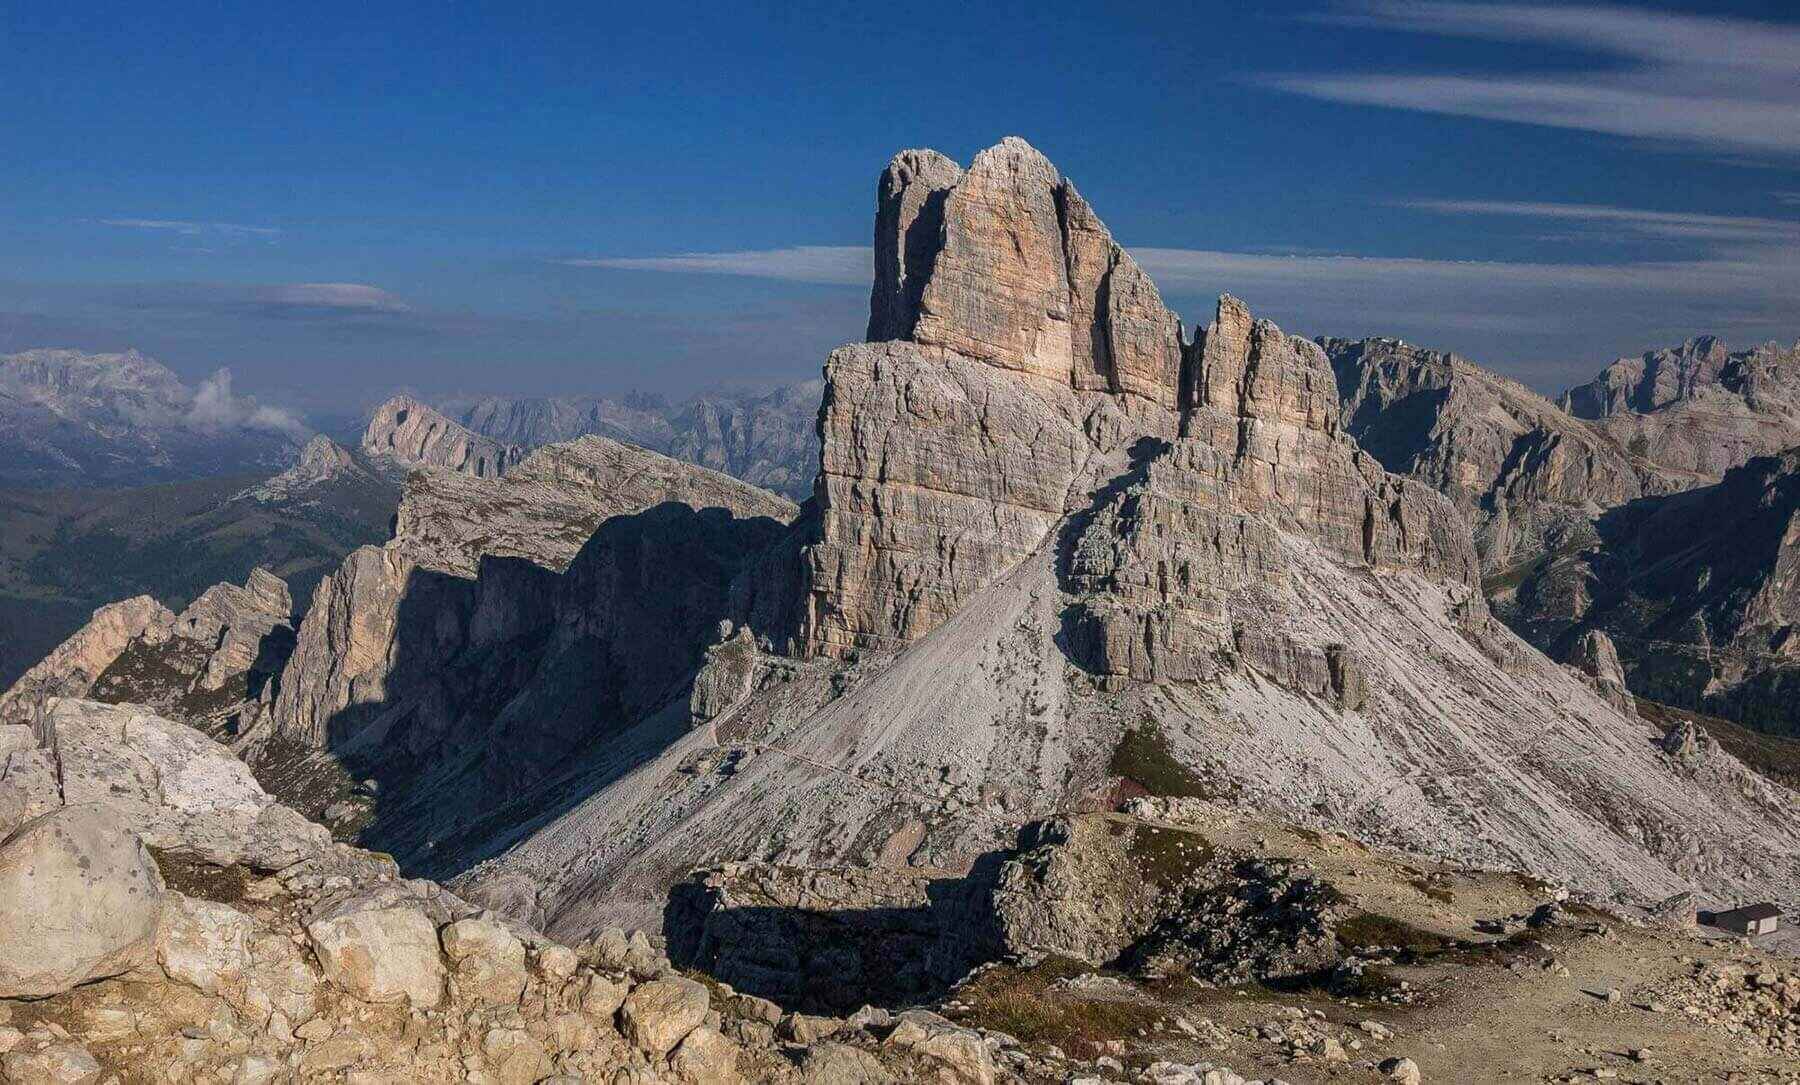 A rocky outcrop in the Dolomites